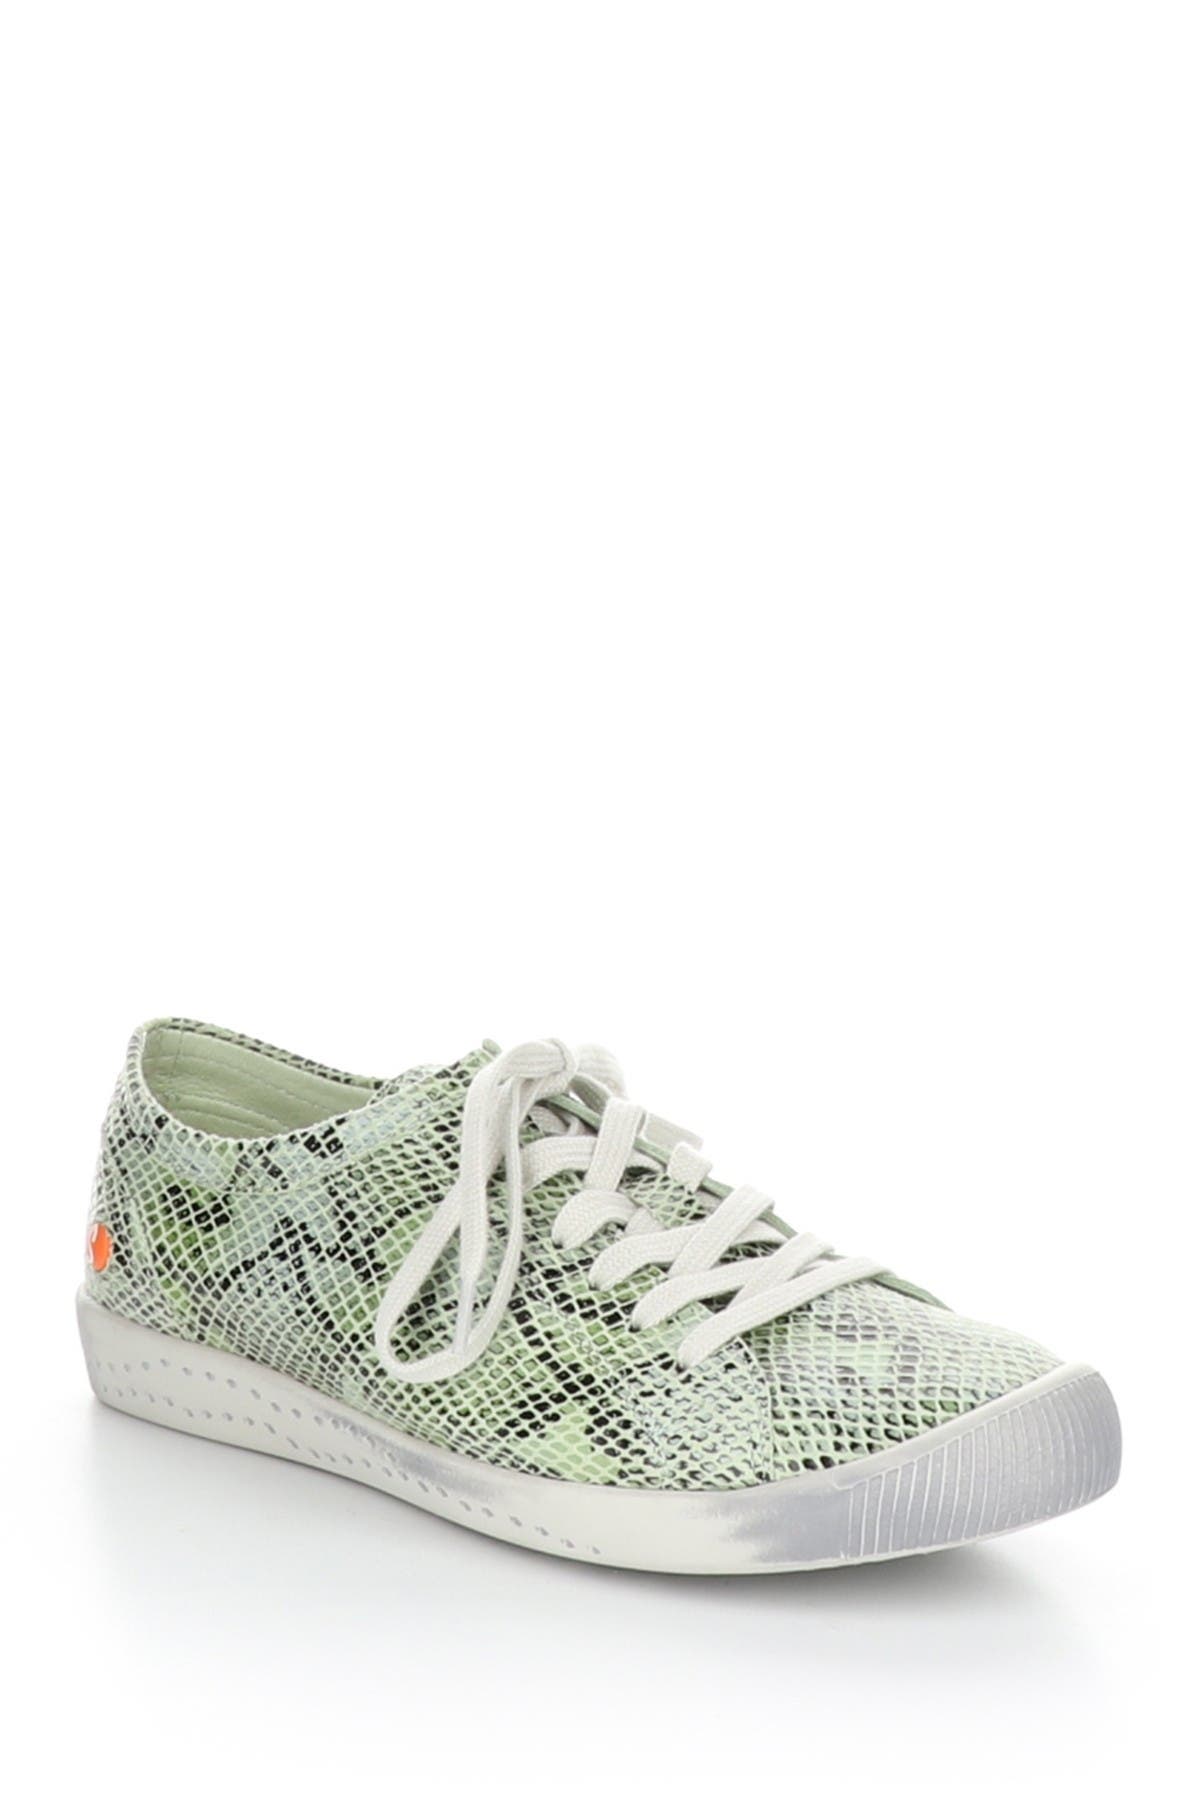 Softinos By Fly London Isla Distressed Sneaker In 587 Green Snake